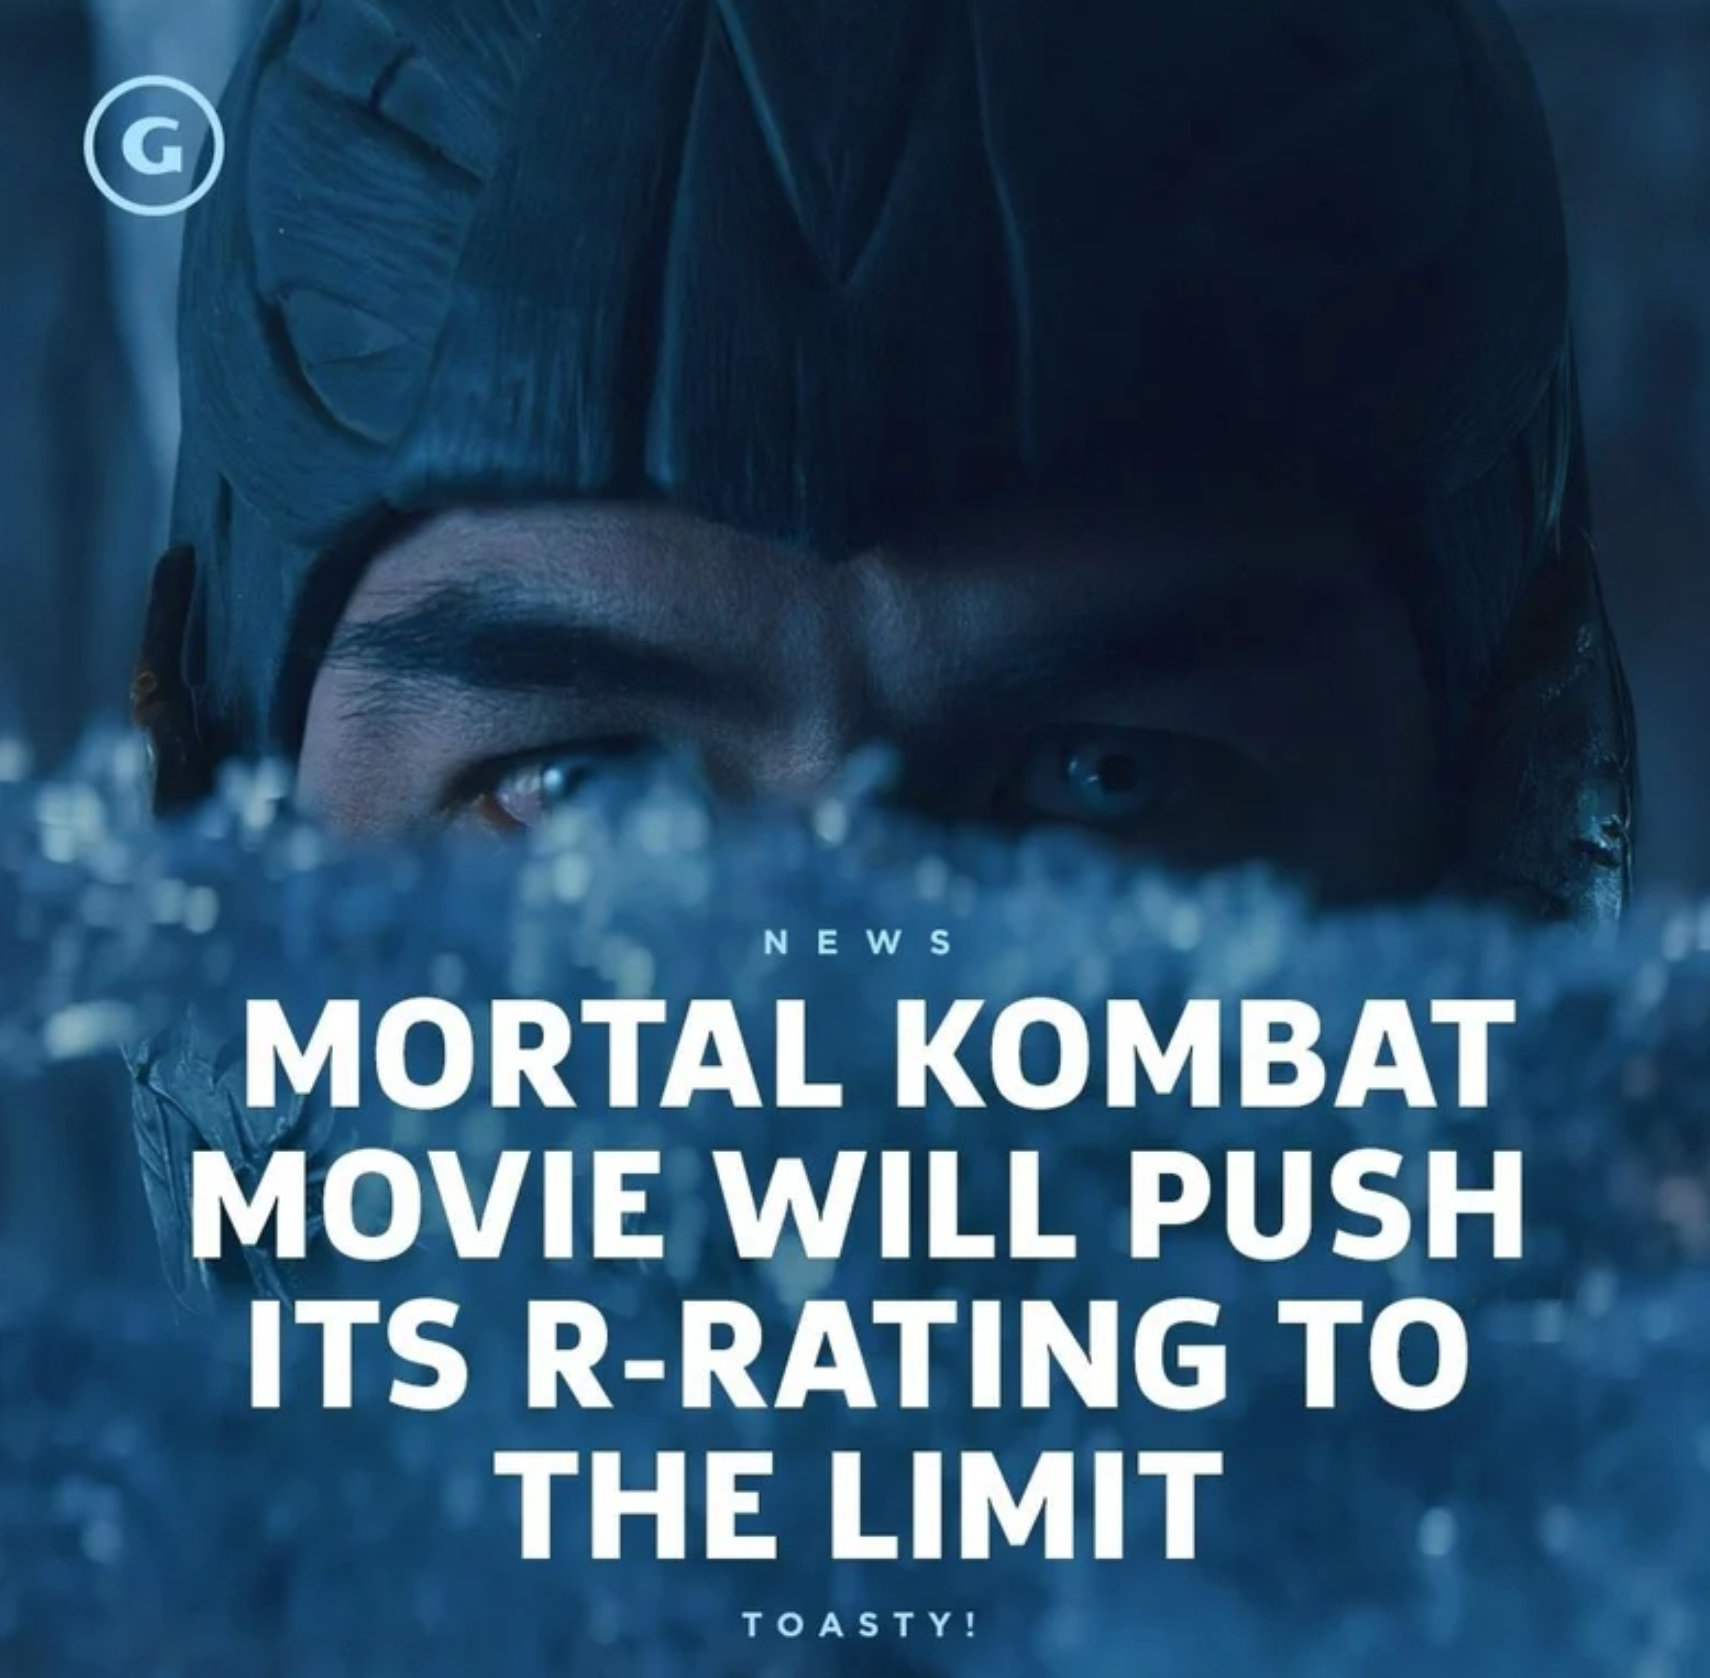 funny gaming memes - entertainment one - G News Mortal Kombat Movie Will Push Its RRating To The Limit Toasty!